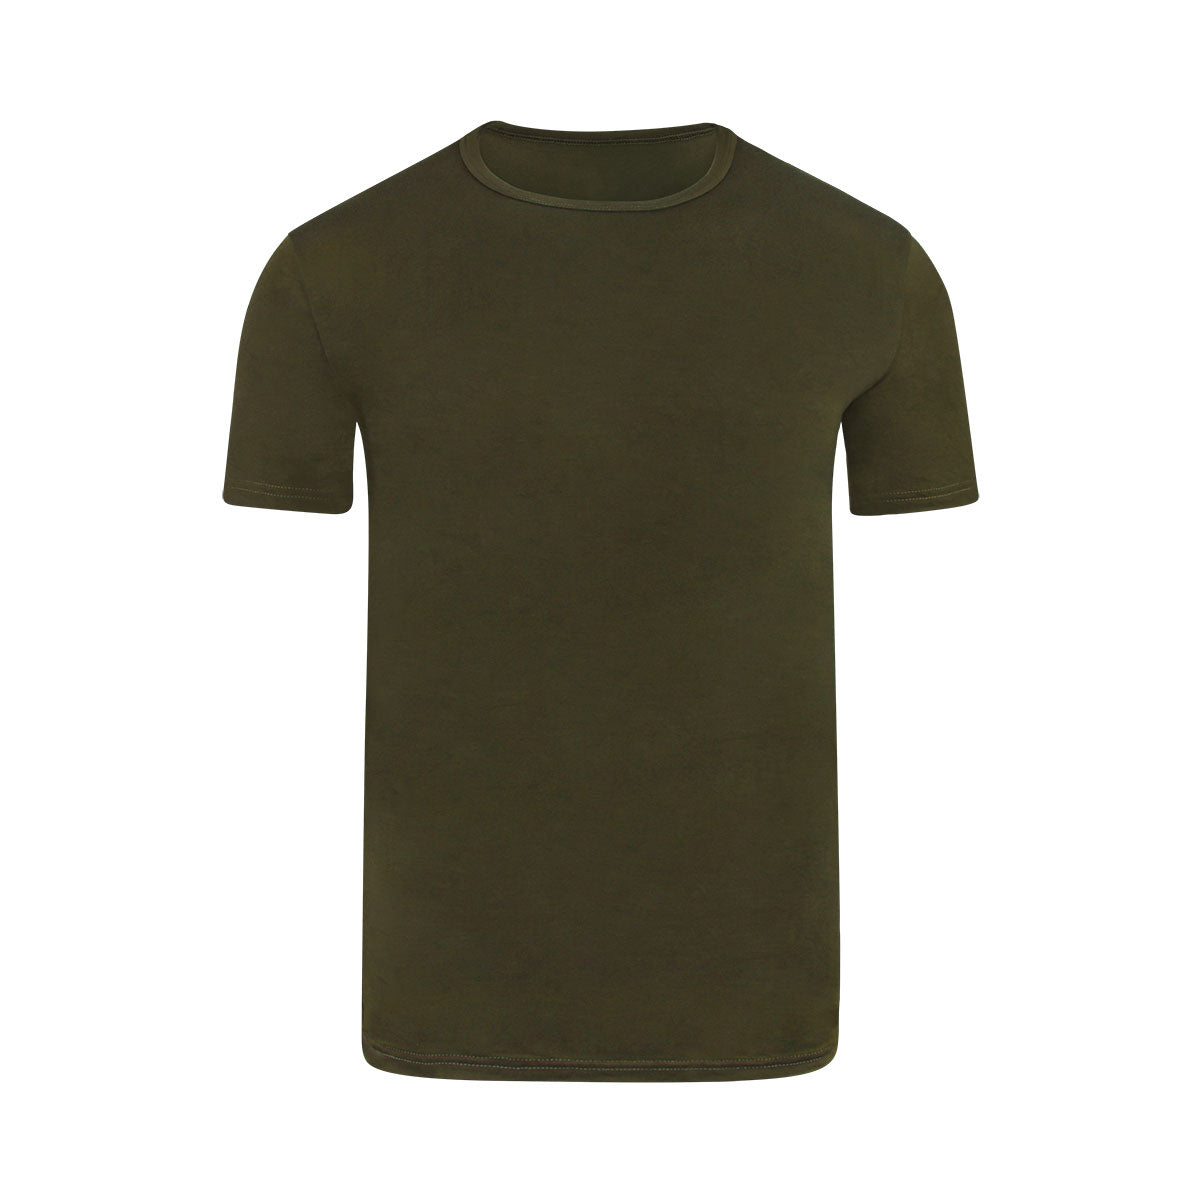 BOXR | Bamboo T-Shirt 4-Pack Olive Green